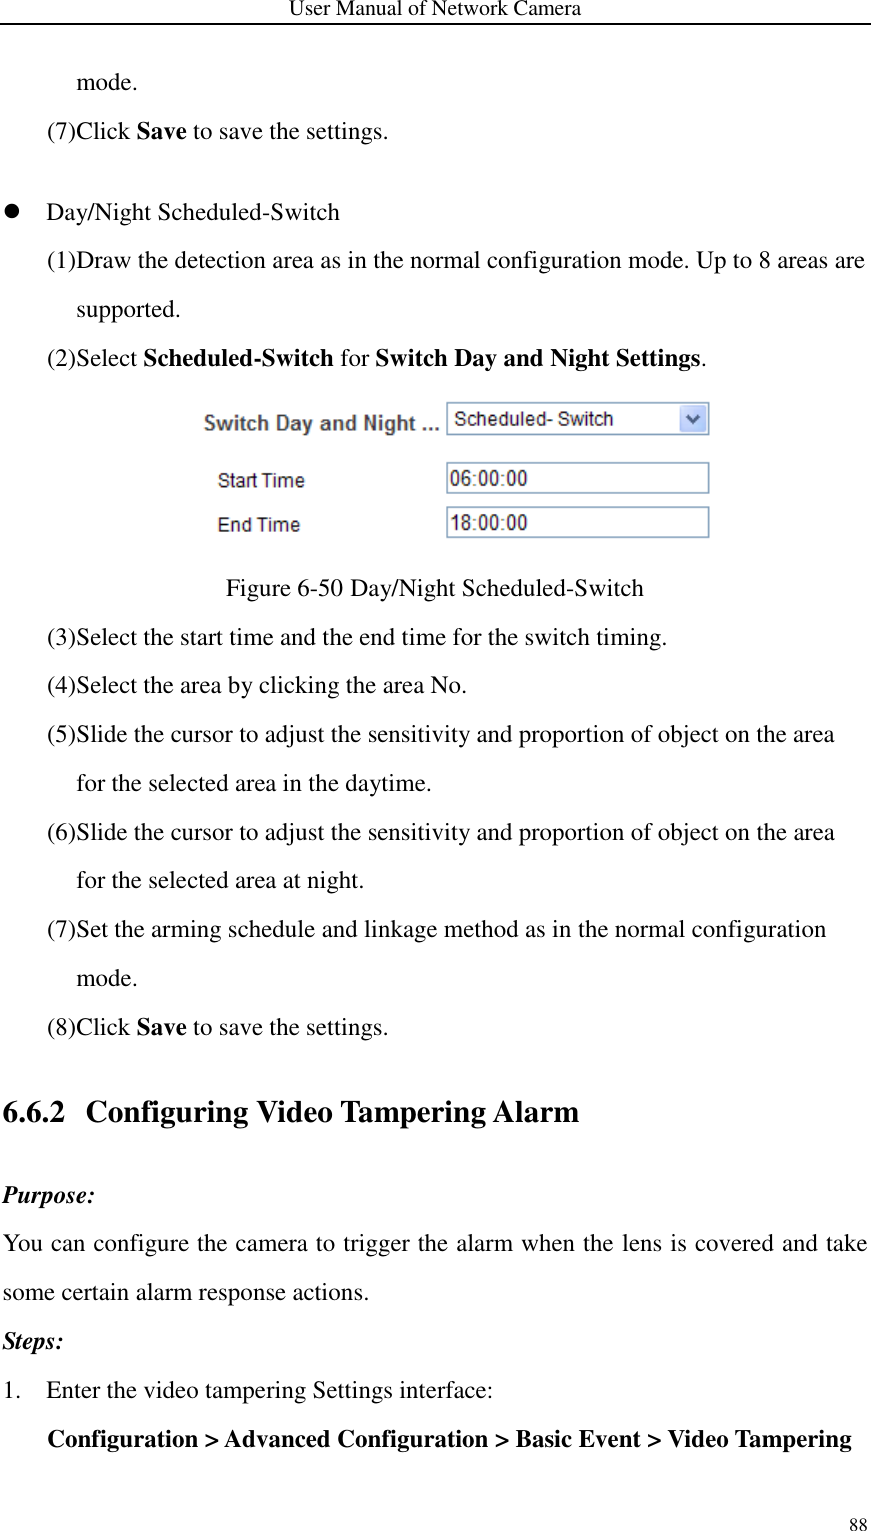 User Manual of Network Camera 88  mode. (7)Click Save to save the settings.   Day/Night Scheduled-Switch (1)Draw the detection area as in the normal configuration mode. Up to 8 areas are supported. (2)Select Scheduled-Switch for Switch Day and Night Settings.  Figure 6-50 Day/Night Scheduled-Switch (3)Select the start time and the end time for the switch timing. (4)Select the area by clicking the area No. (5)Slide the cursor to adjust the sensitivity and proportion of object on the area for the selected area in the daytime. (6)Slide the cursor to adjust the sensitivity and proportion of object on the area for the selected area at night. (7)Set the arming schedule and linkage method as in the normal configuration mode. (8)Click Save to save the settings. 6.6.2 Configuring Video Tampering Alarm Purpose: You can configure the camera to trigger the alarm when the lens is covered and take some certain alarm response actions.   Steps: 1. Enter the video tampering Settings interface: Configuration &gt; Advanced Configuration &gt; Basic Event &gt; Video Tampering 